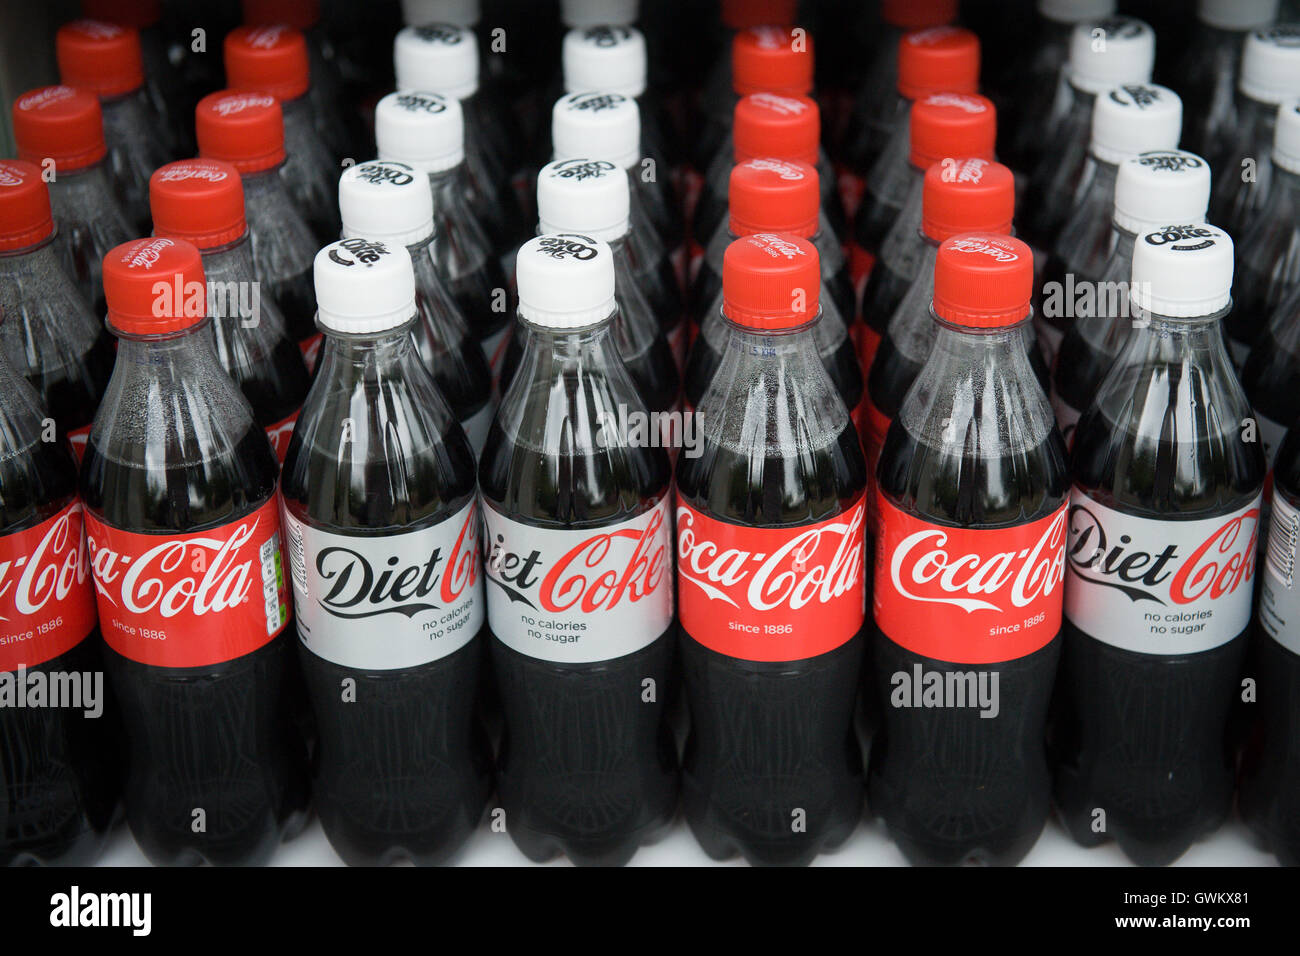 Coke and diet coke bottles on supermarket shelves in UK, which has recently introduced a sugar tax on drinks, which contribute to childhood obesity. Stock Photo